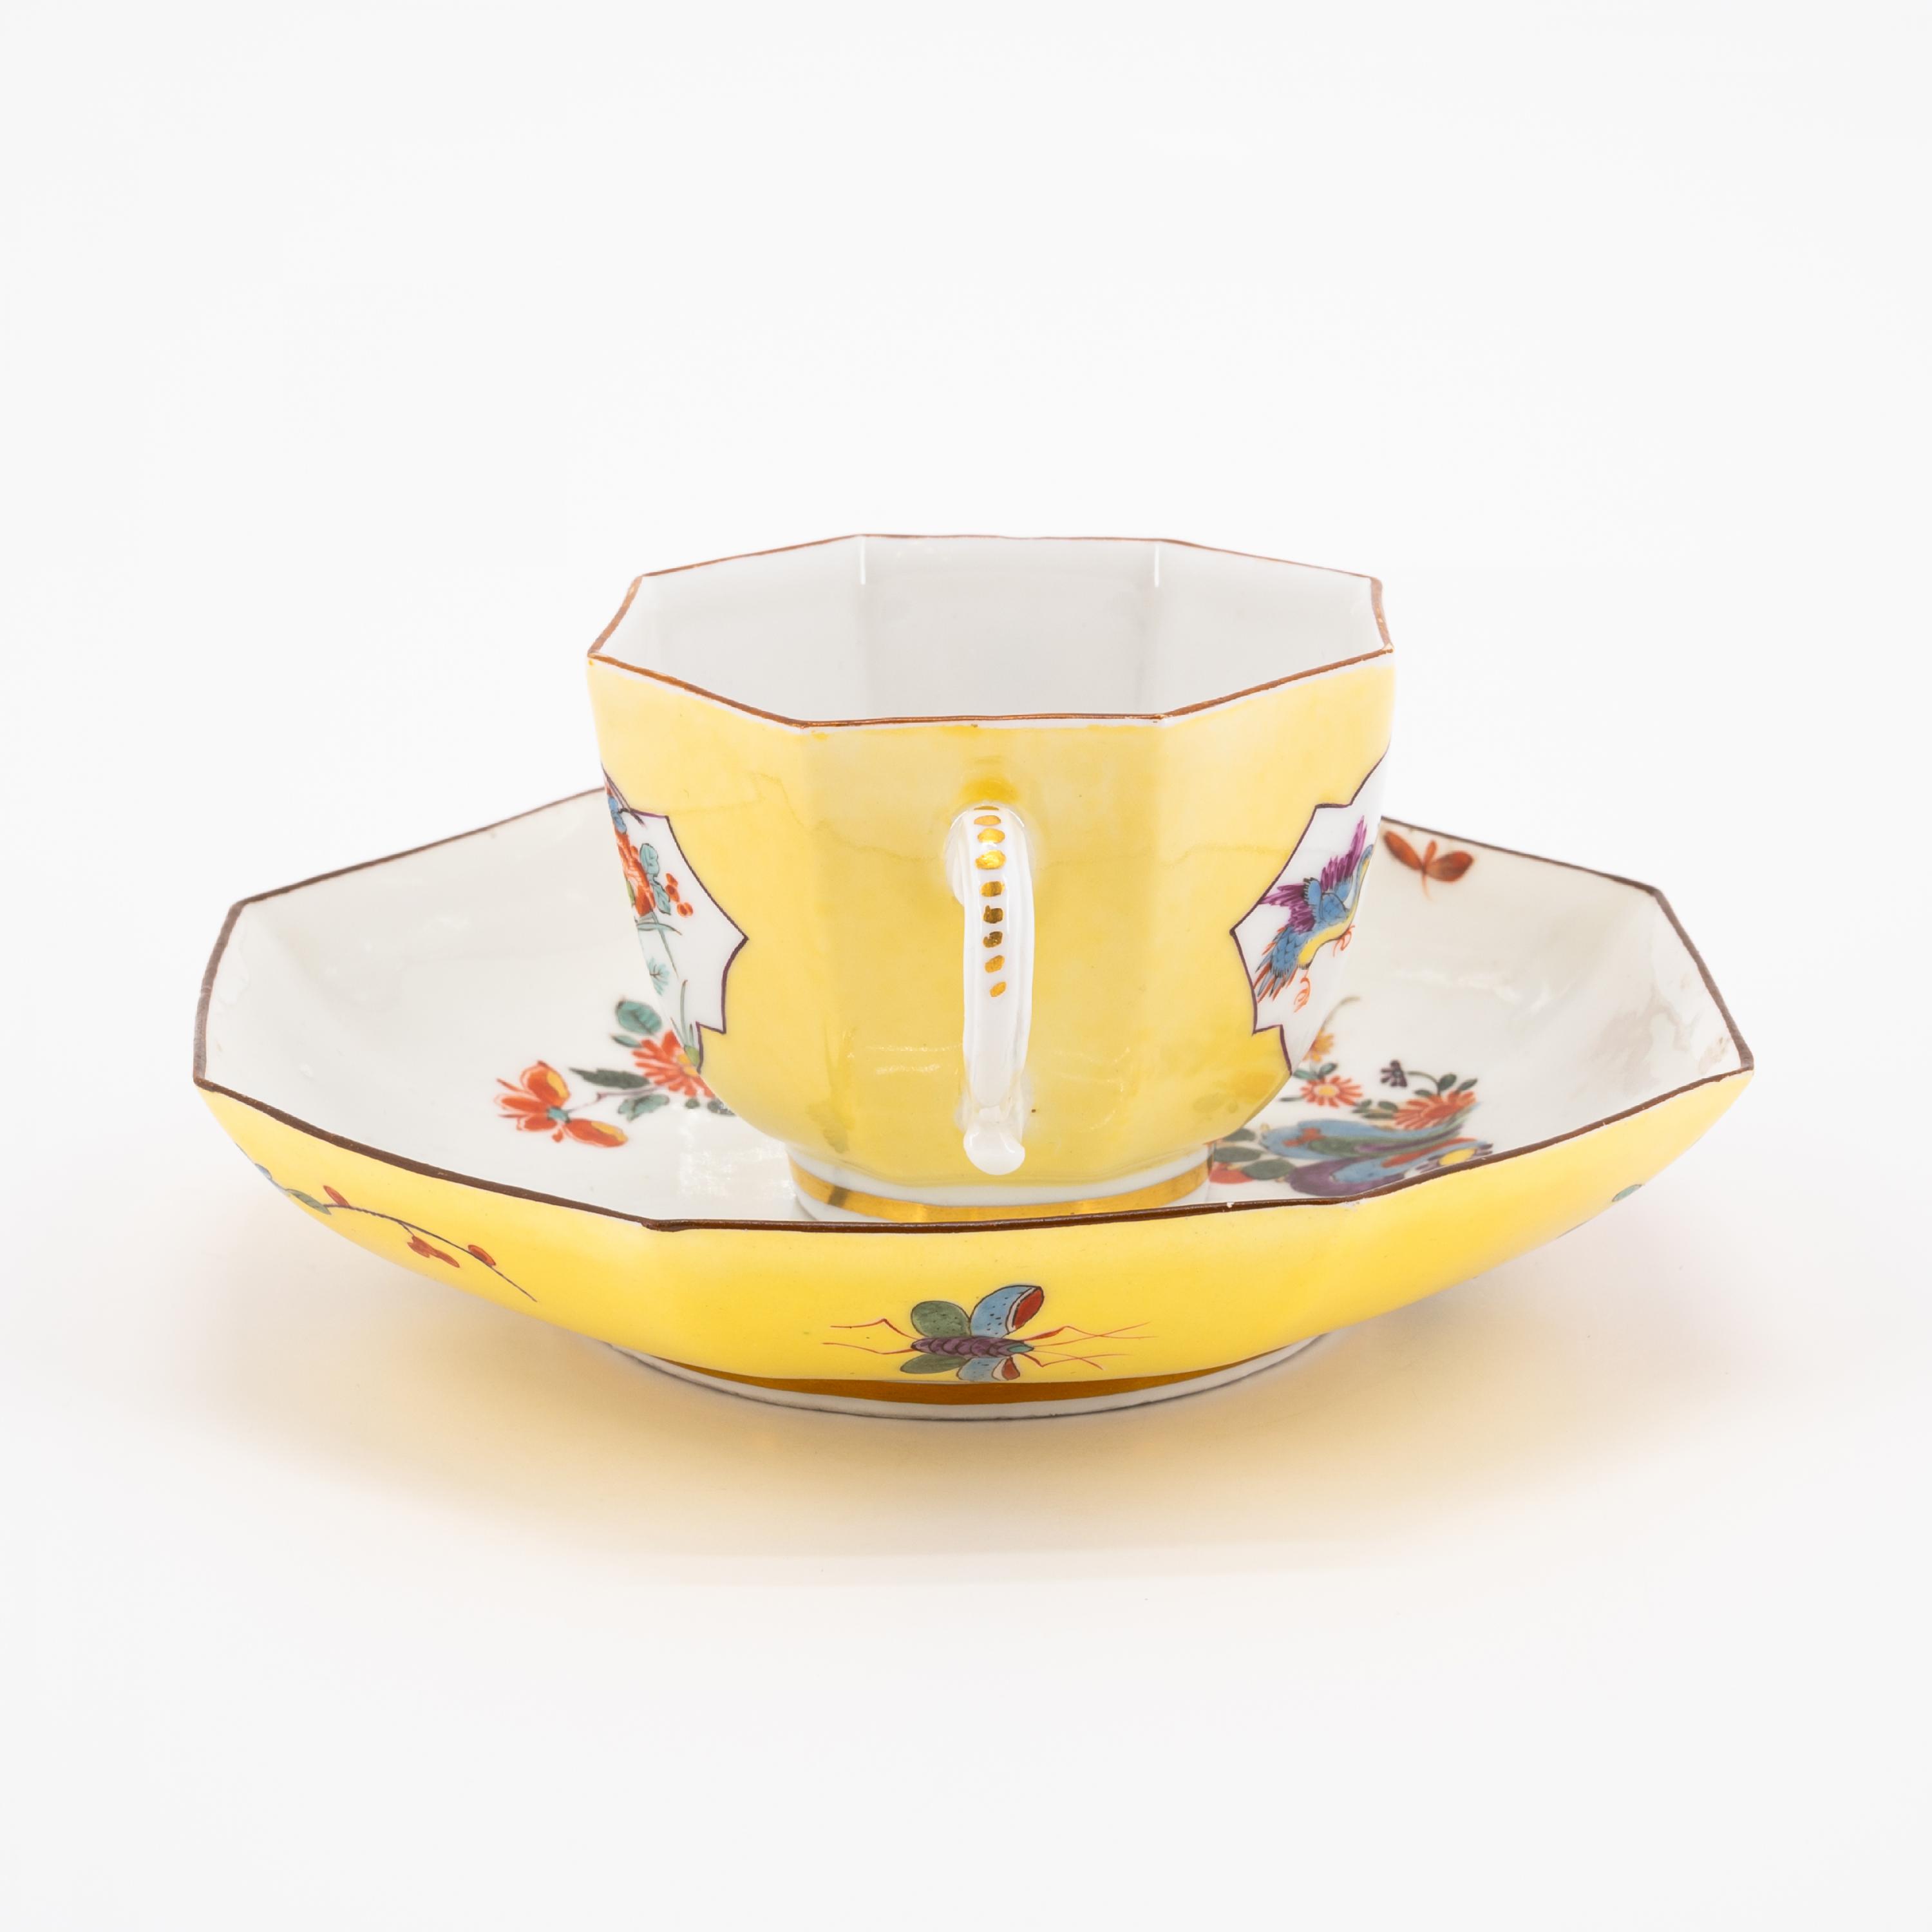 TWO PORCELAIN CUP WITH DOUBLE HANDLES & SAUCERS WITH KAKIEMON DECOR AND YELLOW GROUND - Image 4 of 11